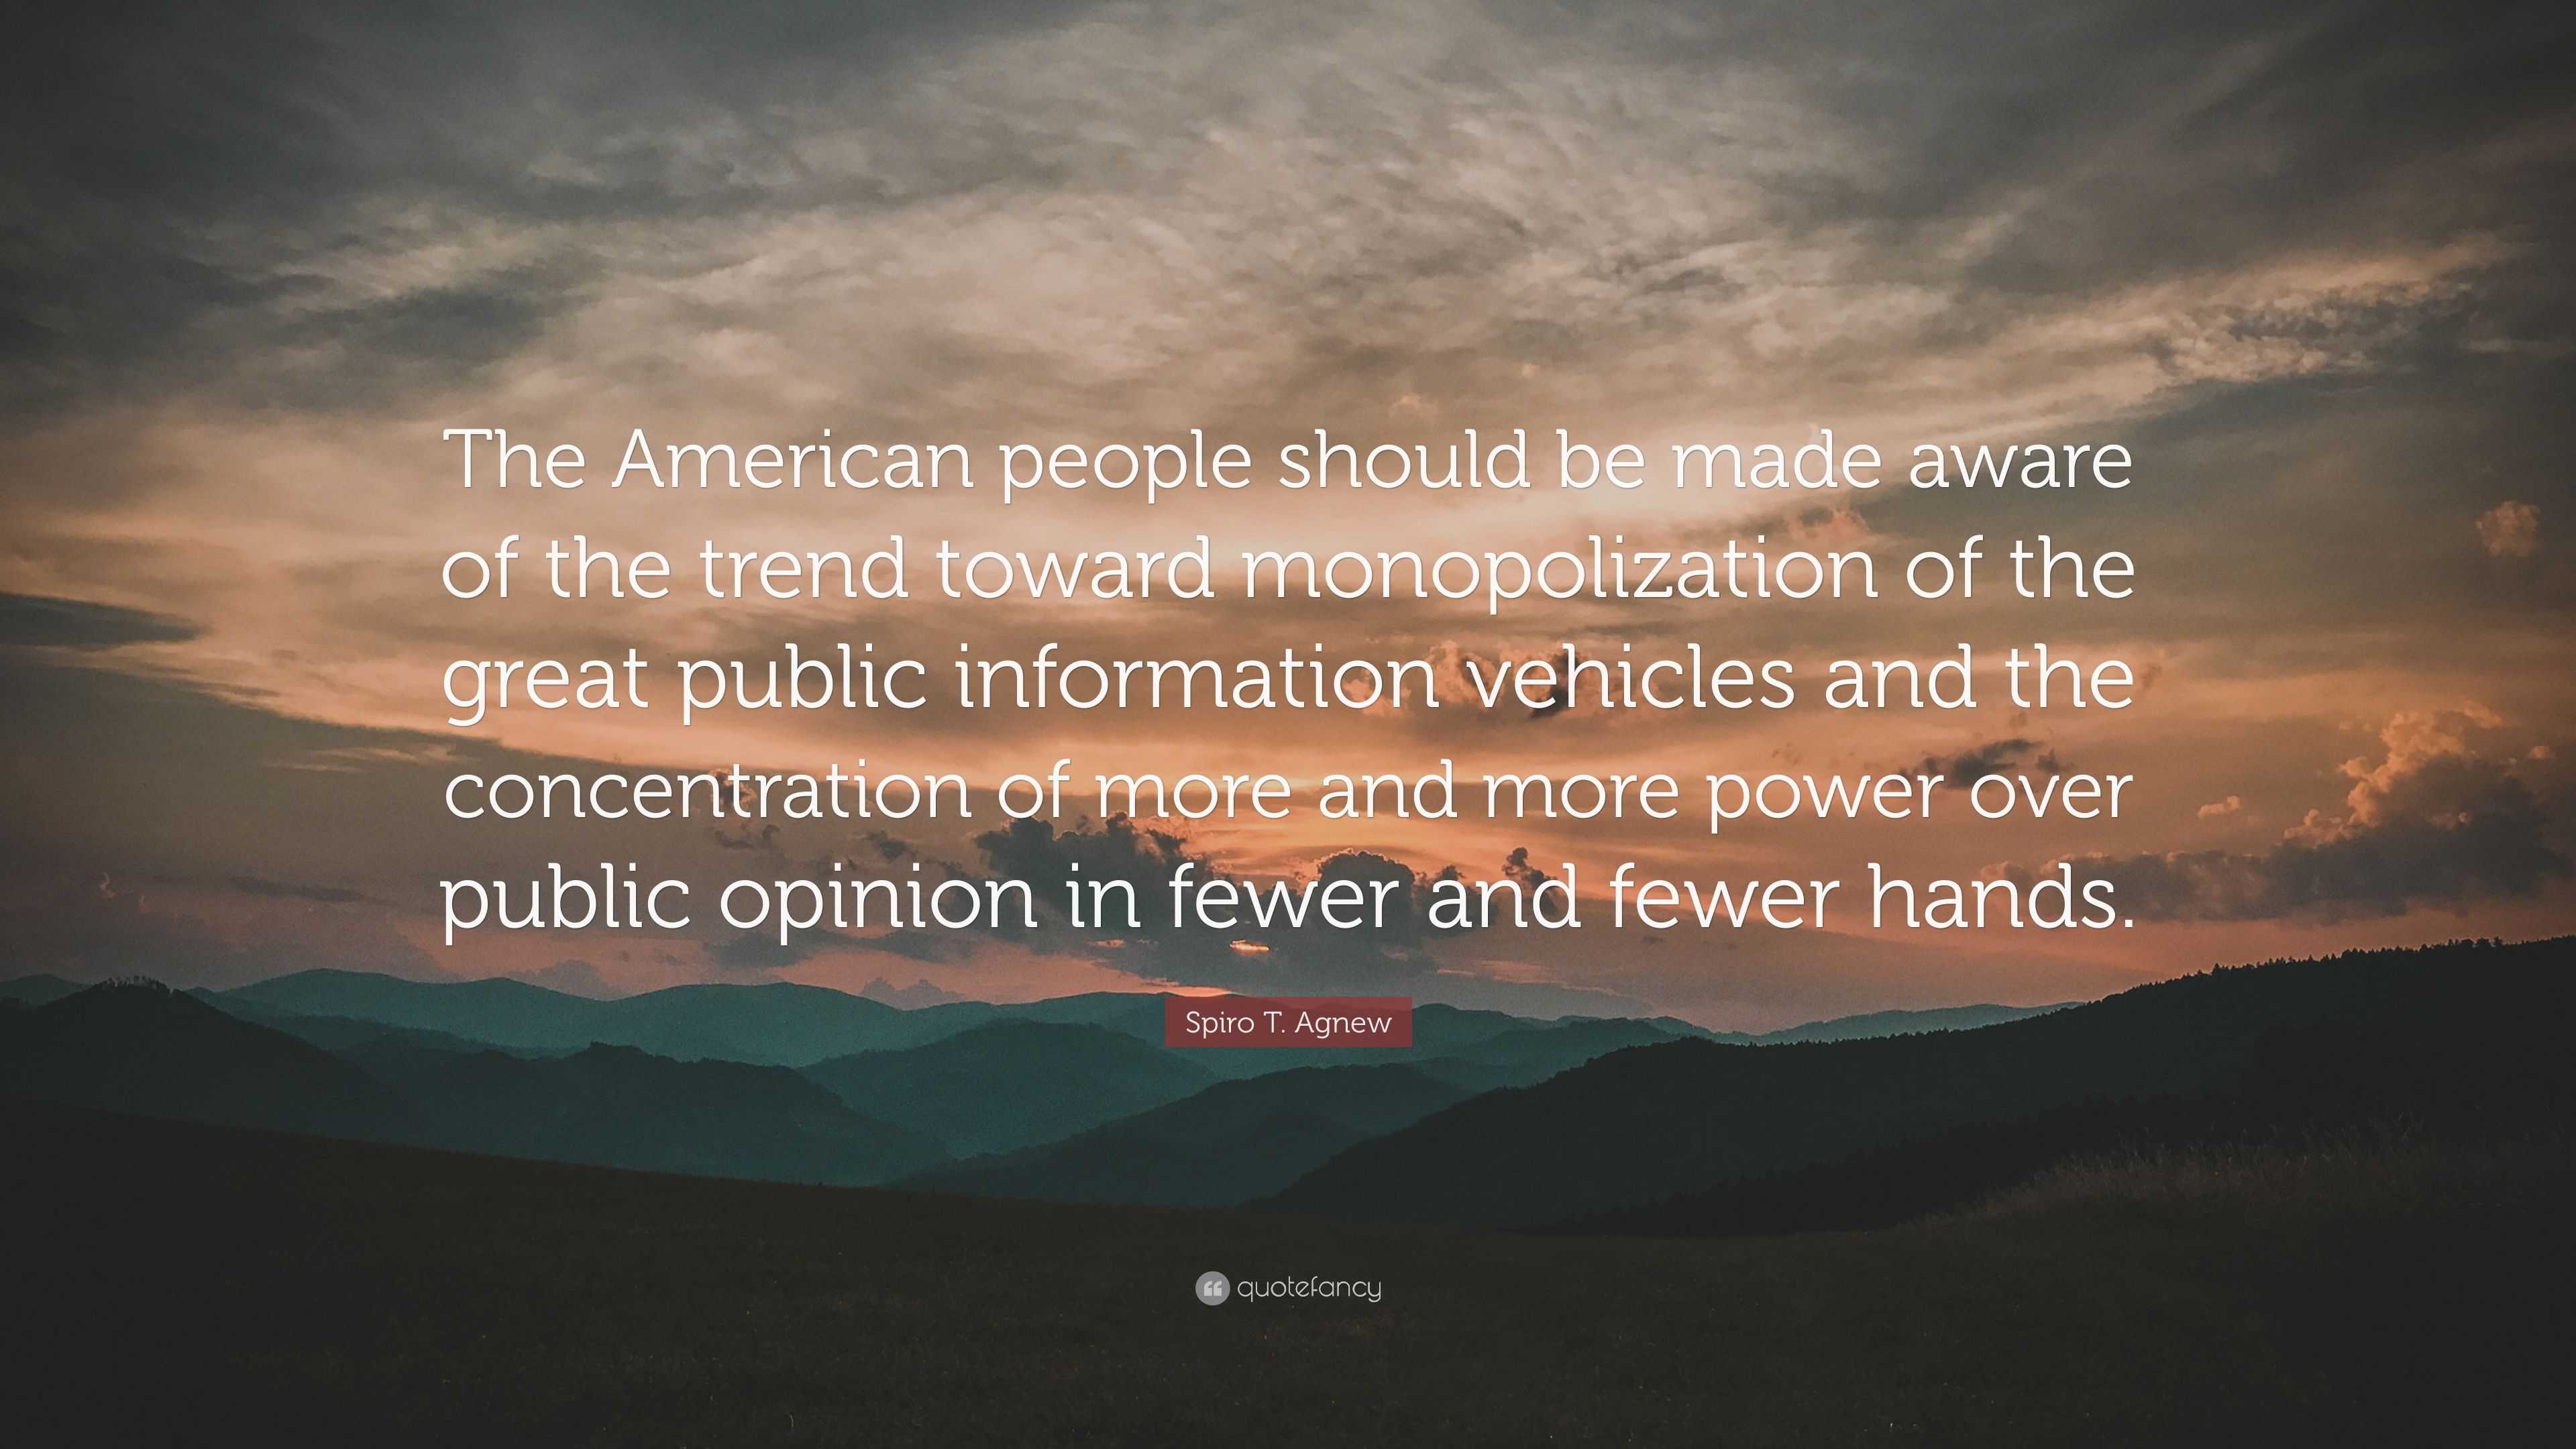 Spiro T. Agnew Quote: “The American people should be made aware of the ...